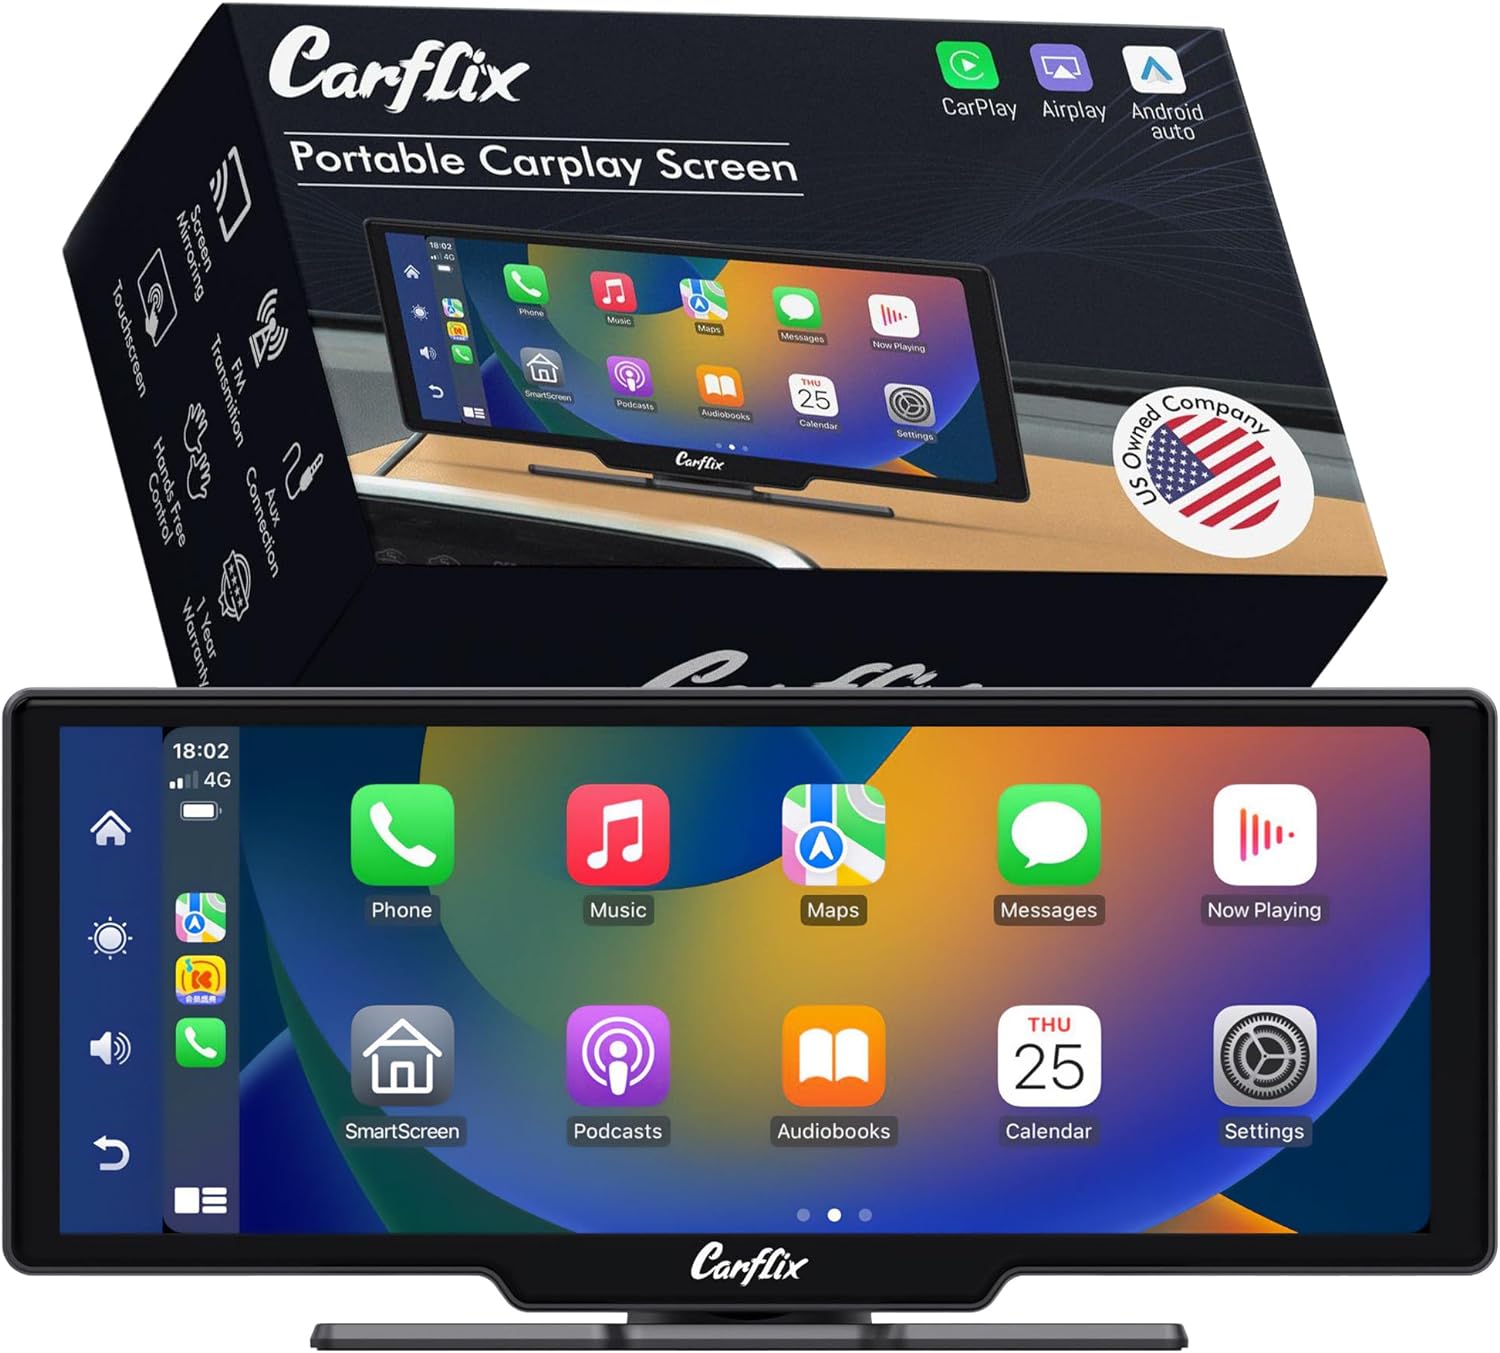 Portable Wireless CarPlay Screen for Car- 10.26 Inch Car Play Screen & Stereo Compatible with Android Auto and Apple CarPlay - Multimedia Player, Bluetooth, Navigation Screen for All Vehicles